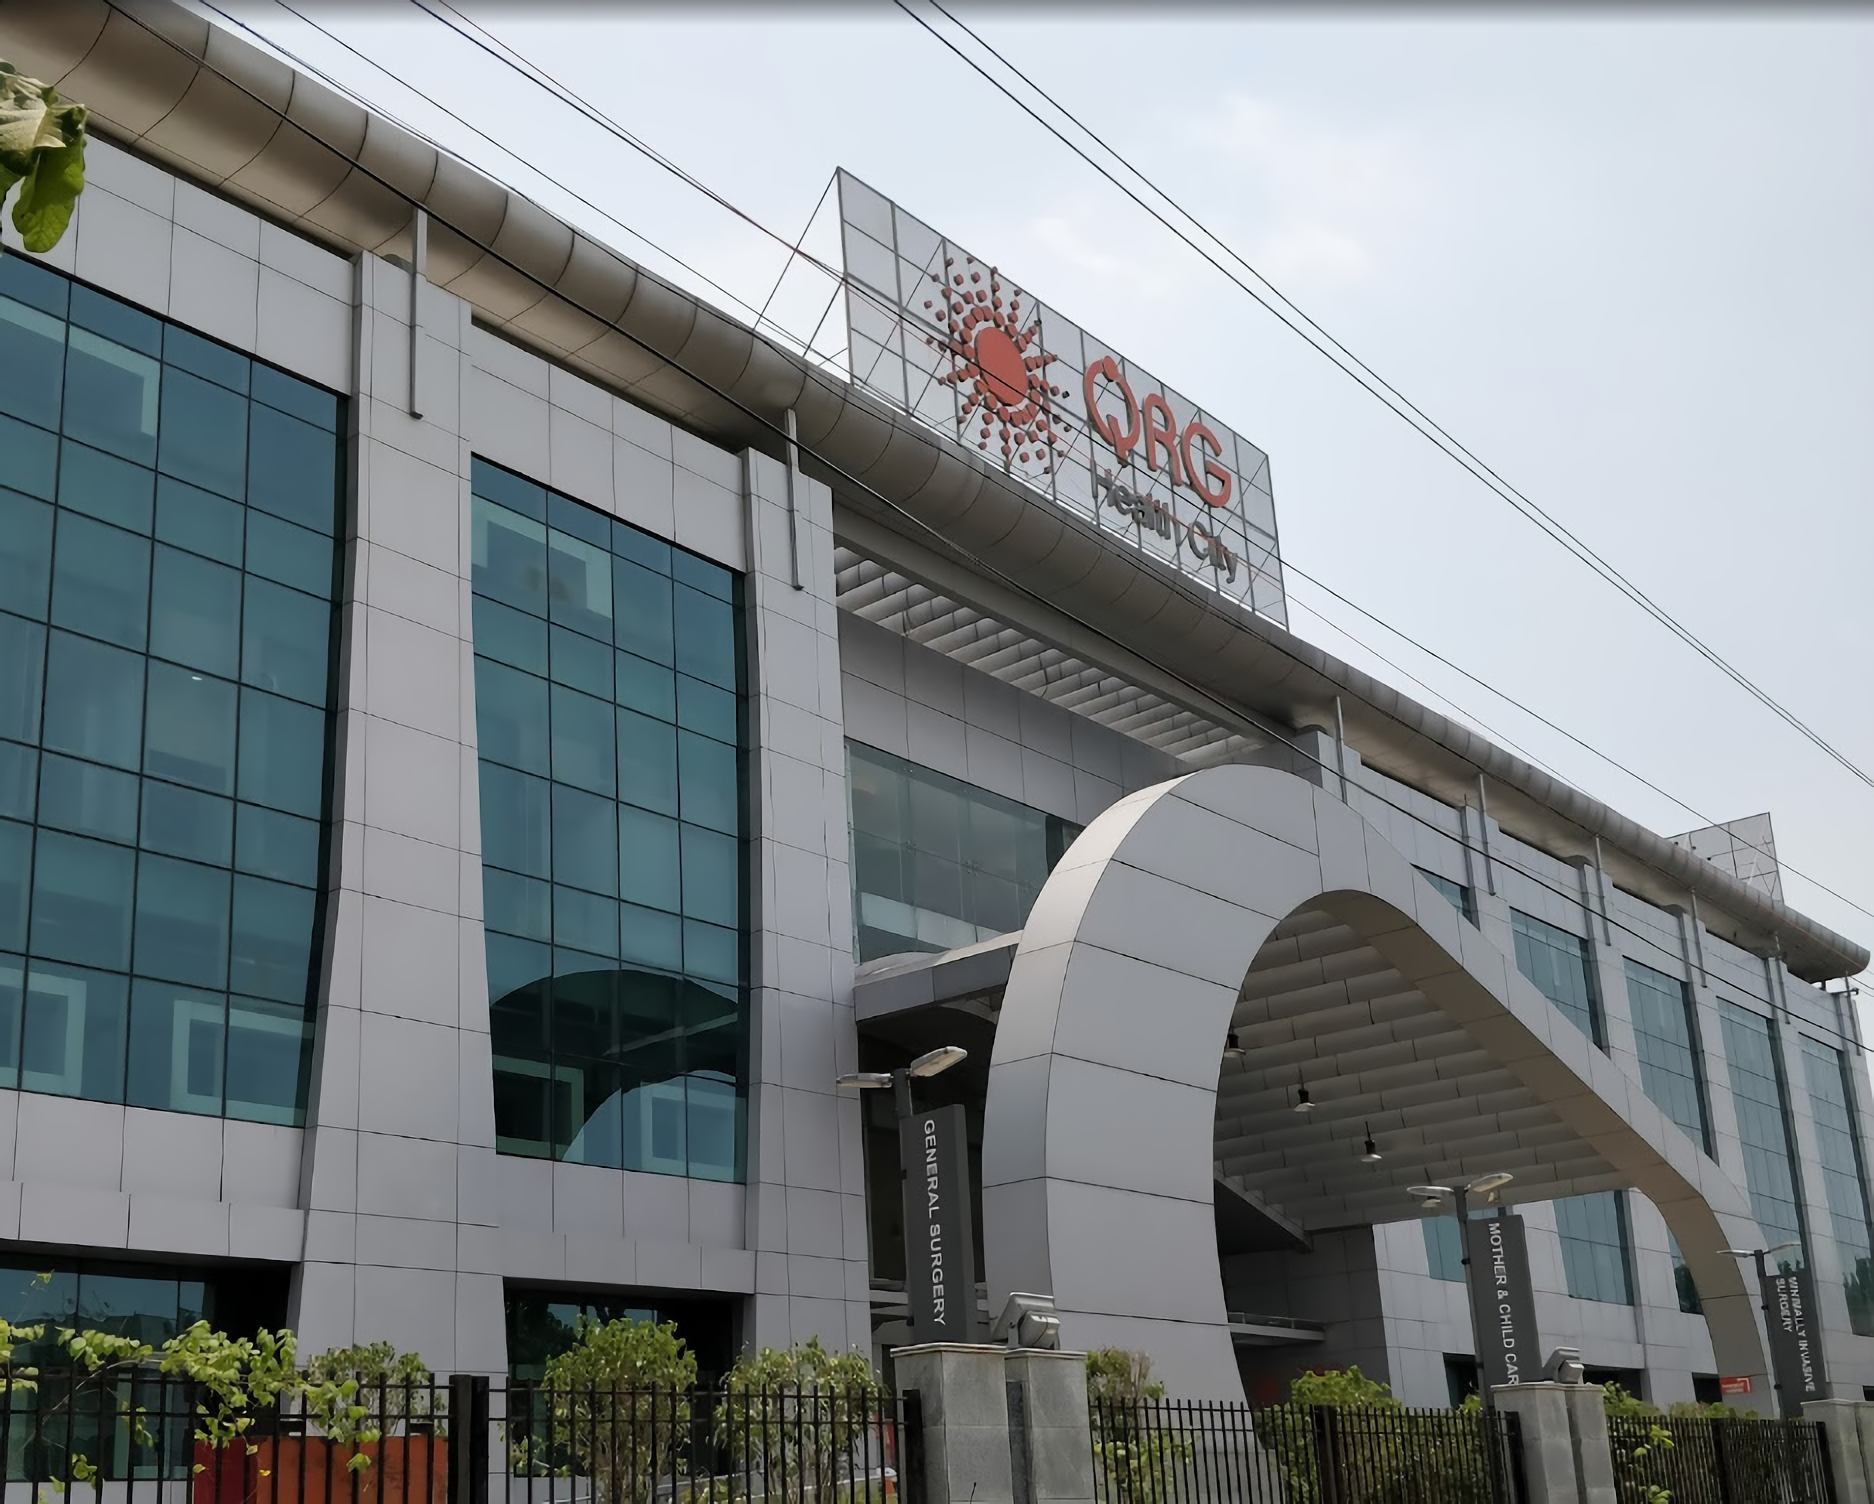 QRG Super Speciality Hospital